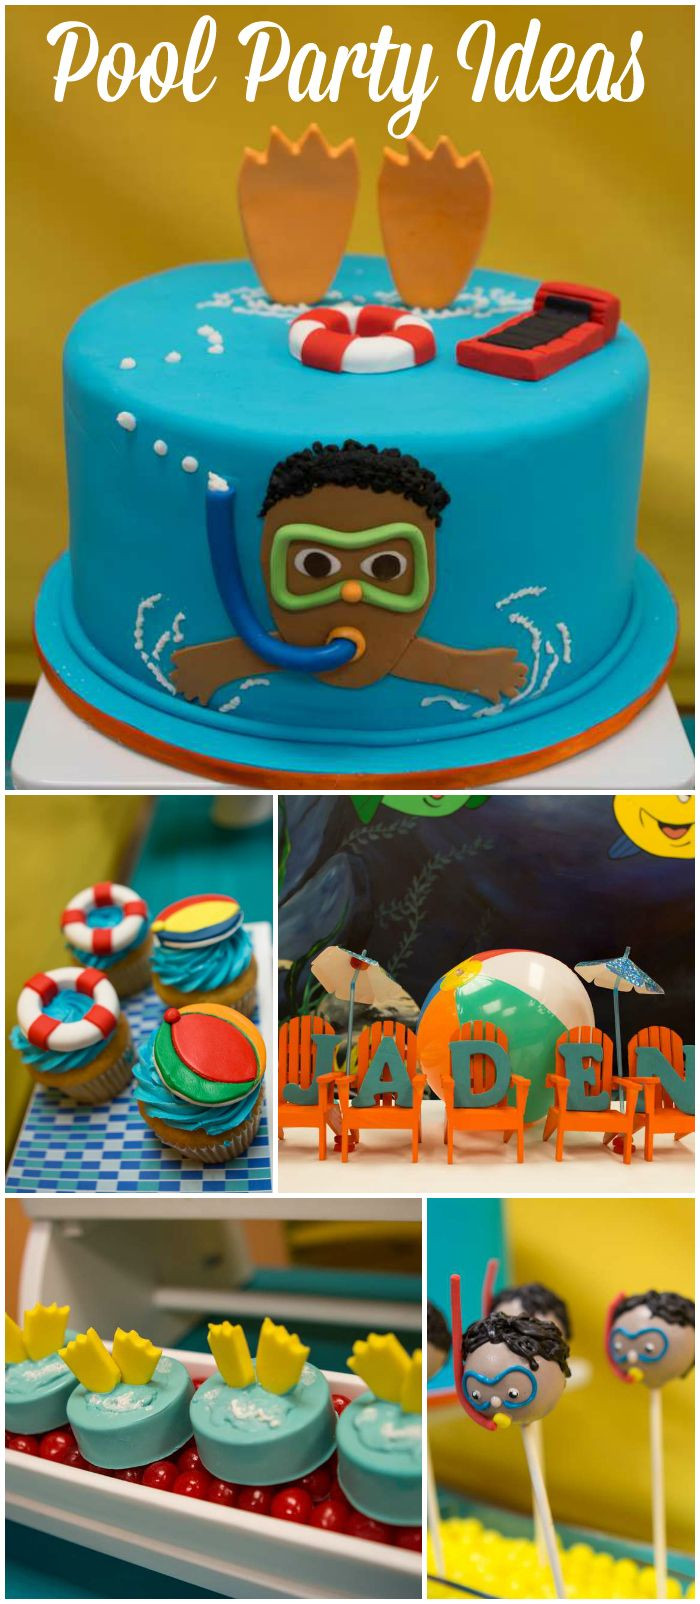 Pool Party Ideas For Boys
 Check out this pool party with colorful beach balls and